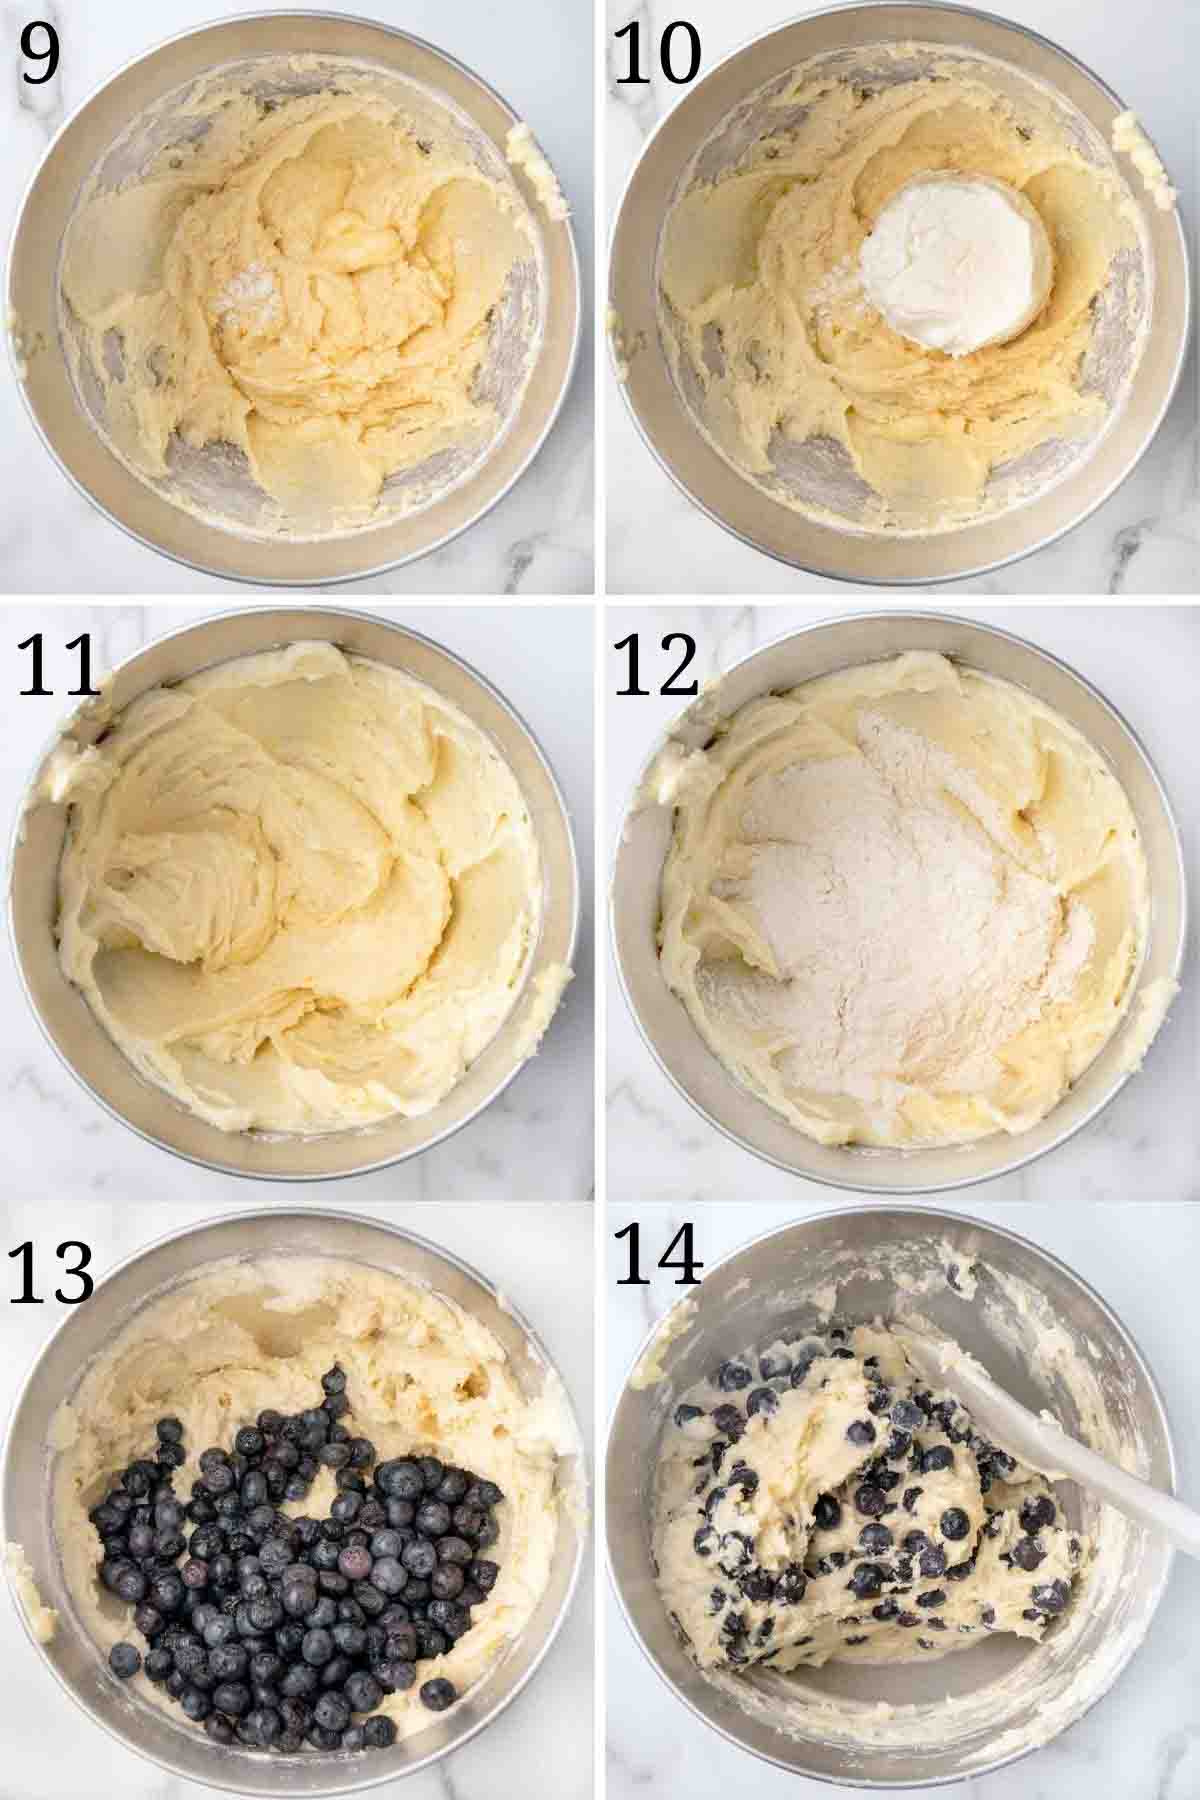 six images showing how to finish making blueberry buckle.